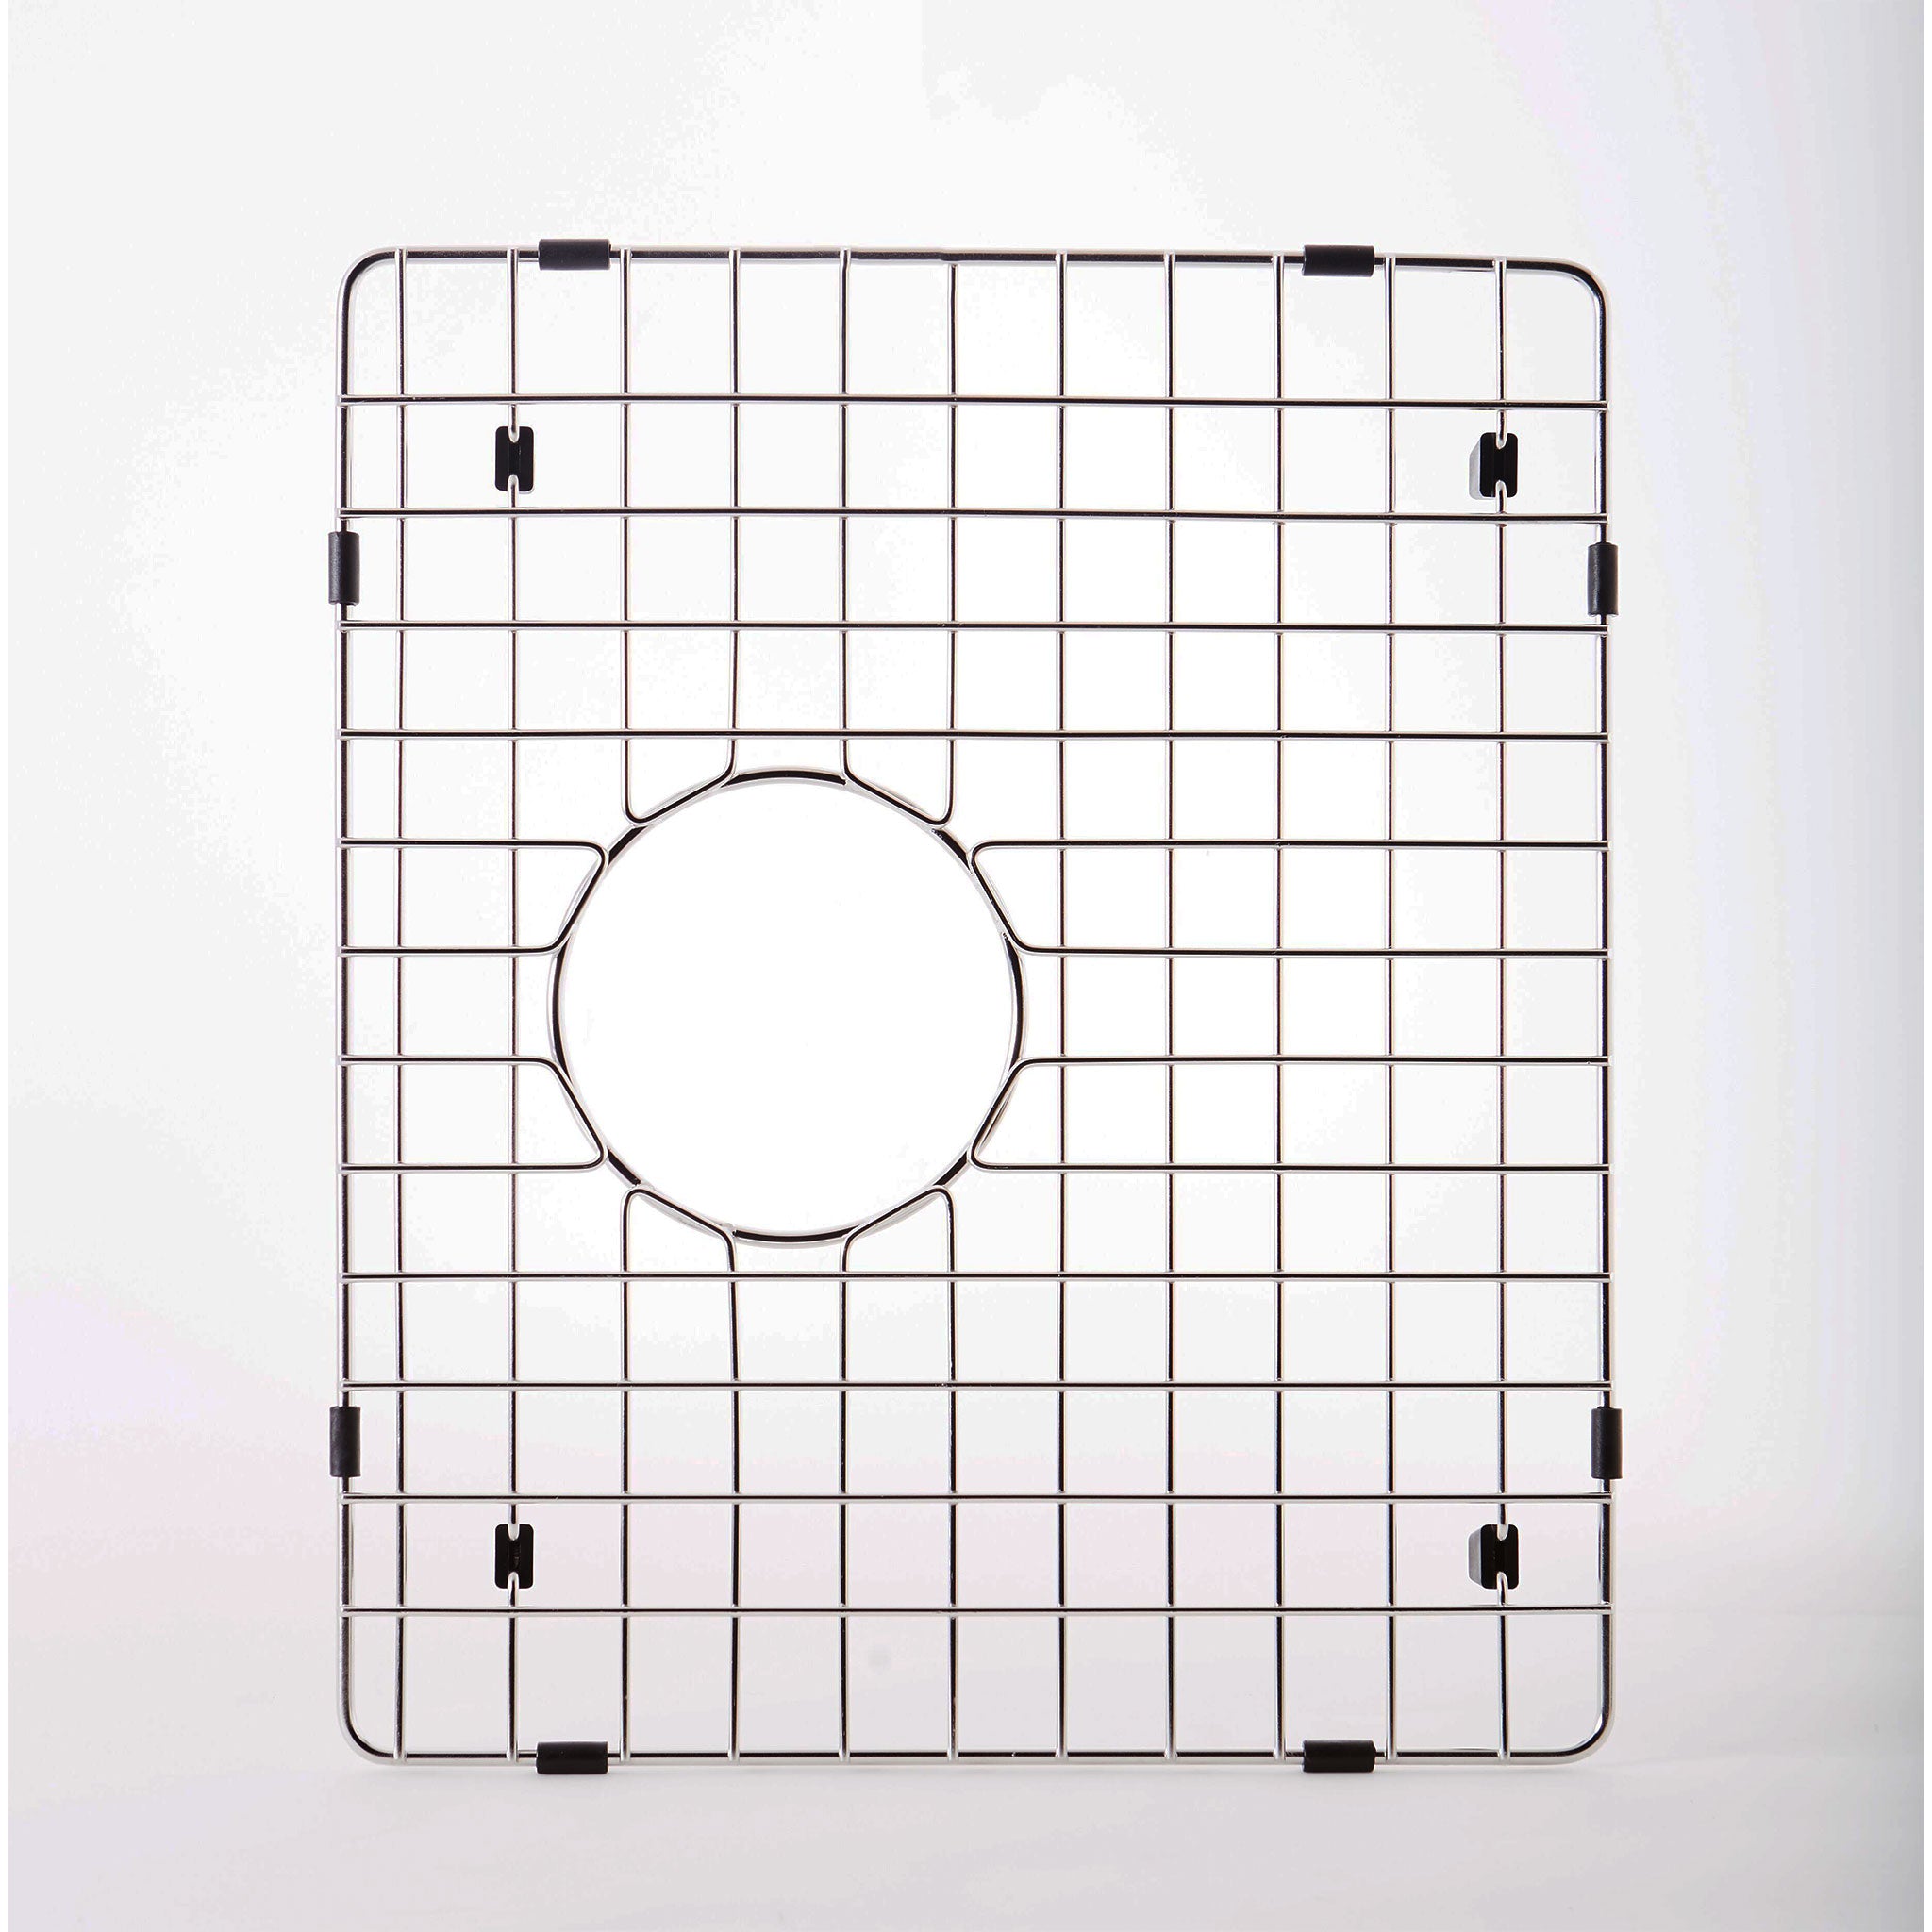 39" small bowl - stainless steel sink grid